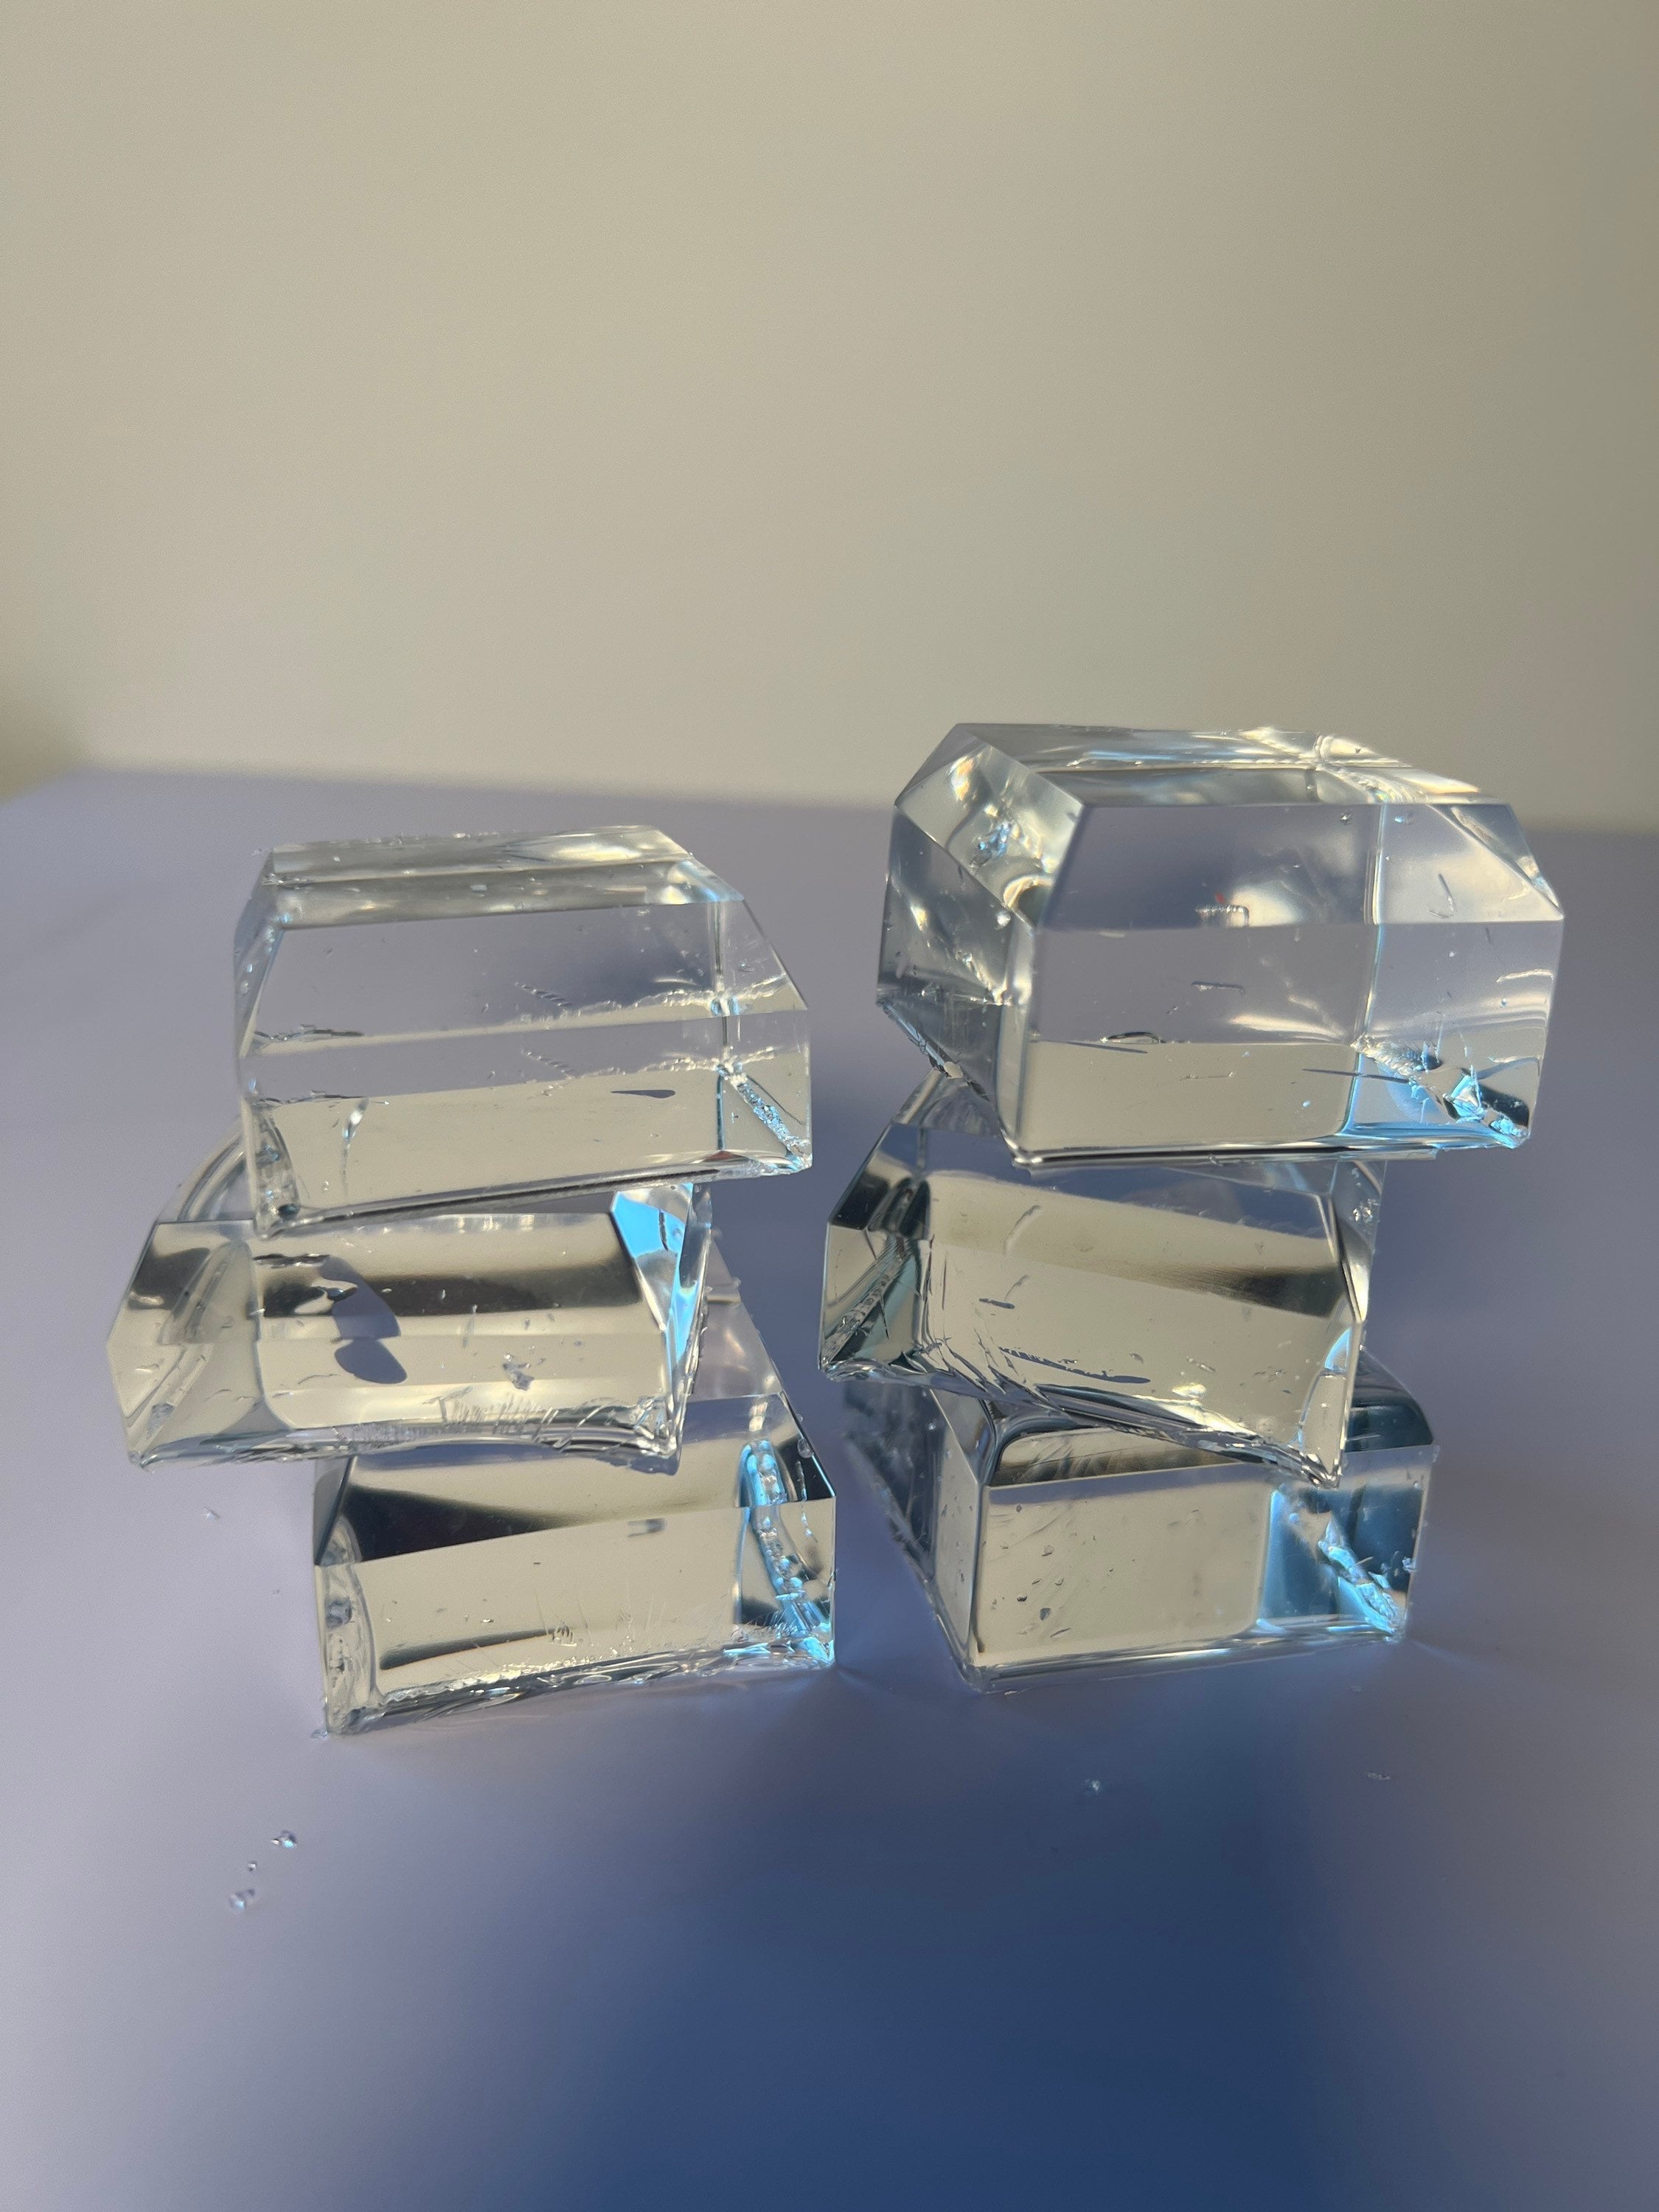 HUGE CLEAR CUBES, 30 Mm Ice Cubes, Photography Props, Small Gift for Kids 